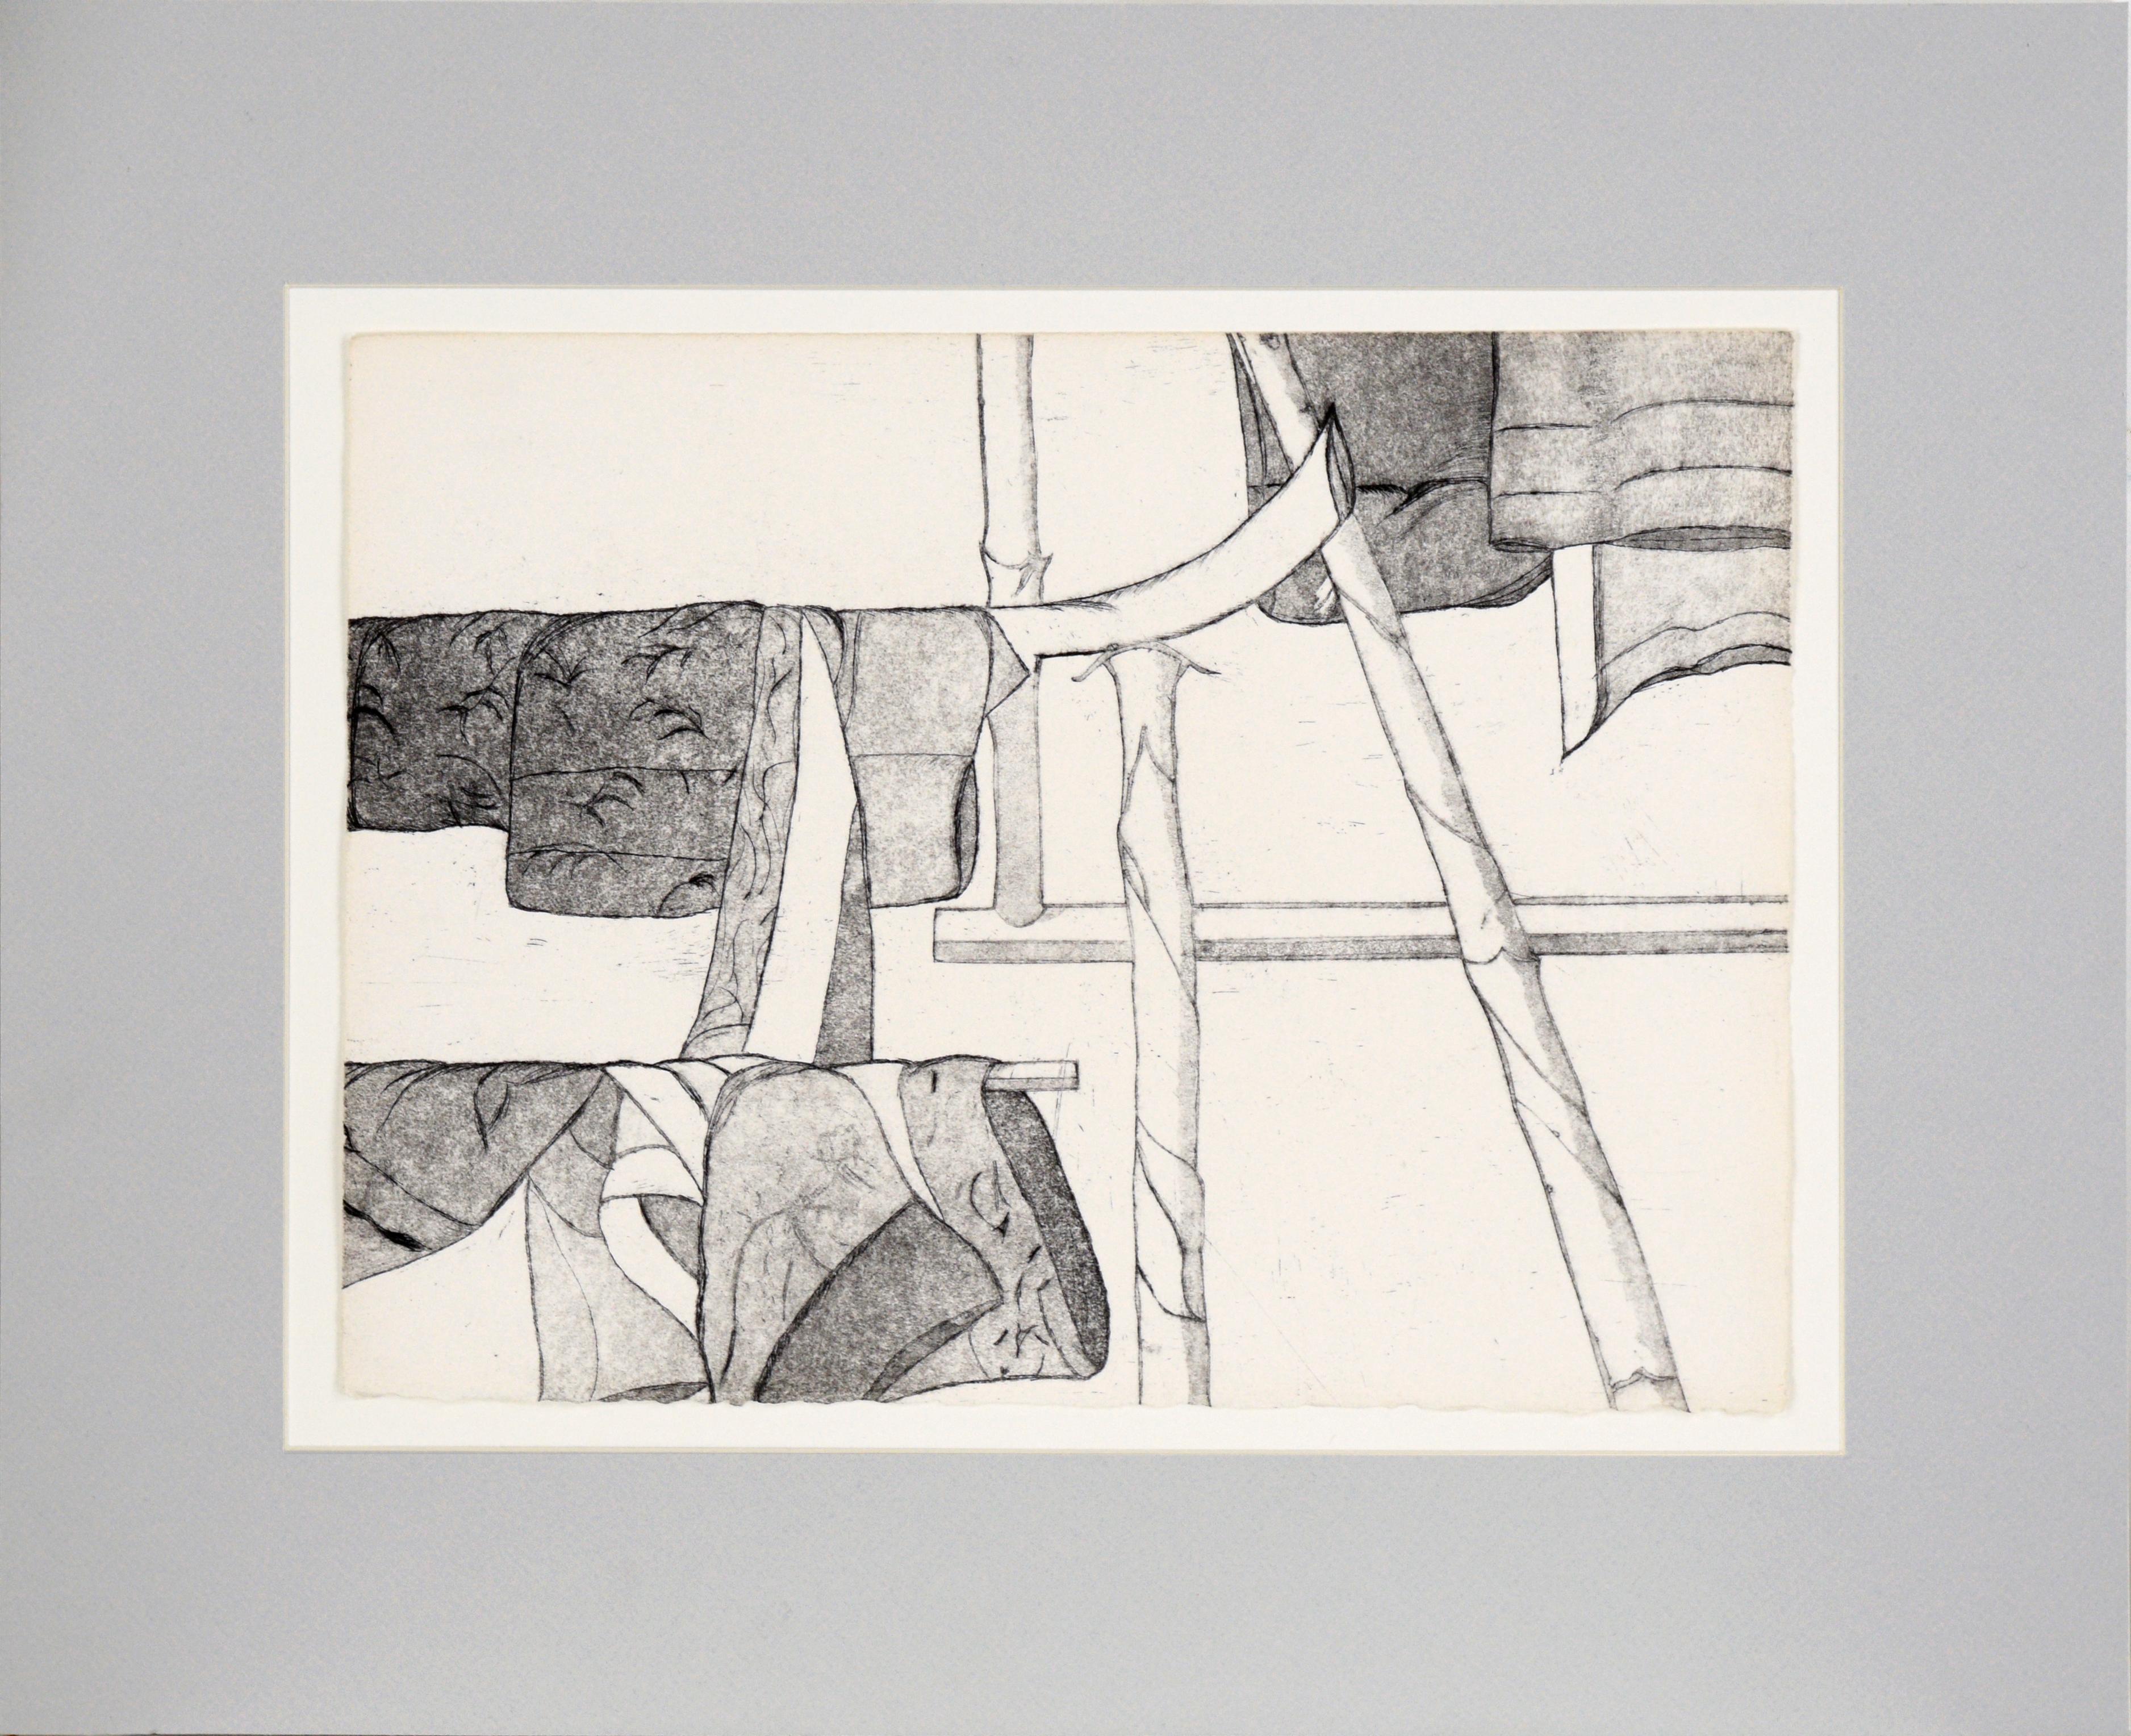 Hanging Cloth to Dry - Etching on Paper (#8/15)